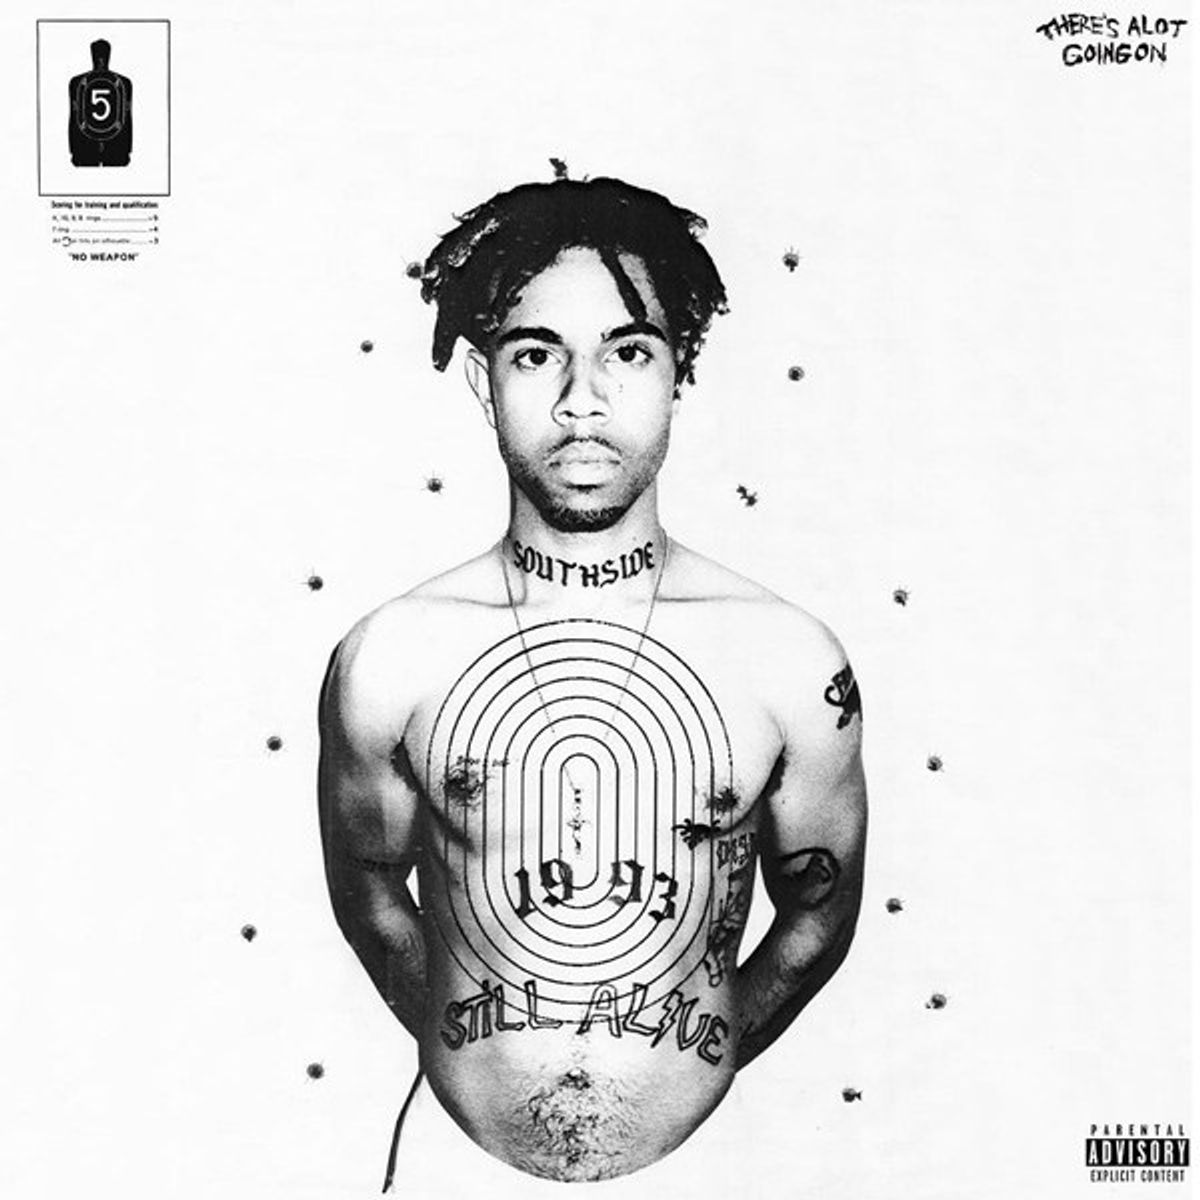 "There's Alot Going On" with Vic Mensa